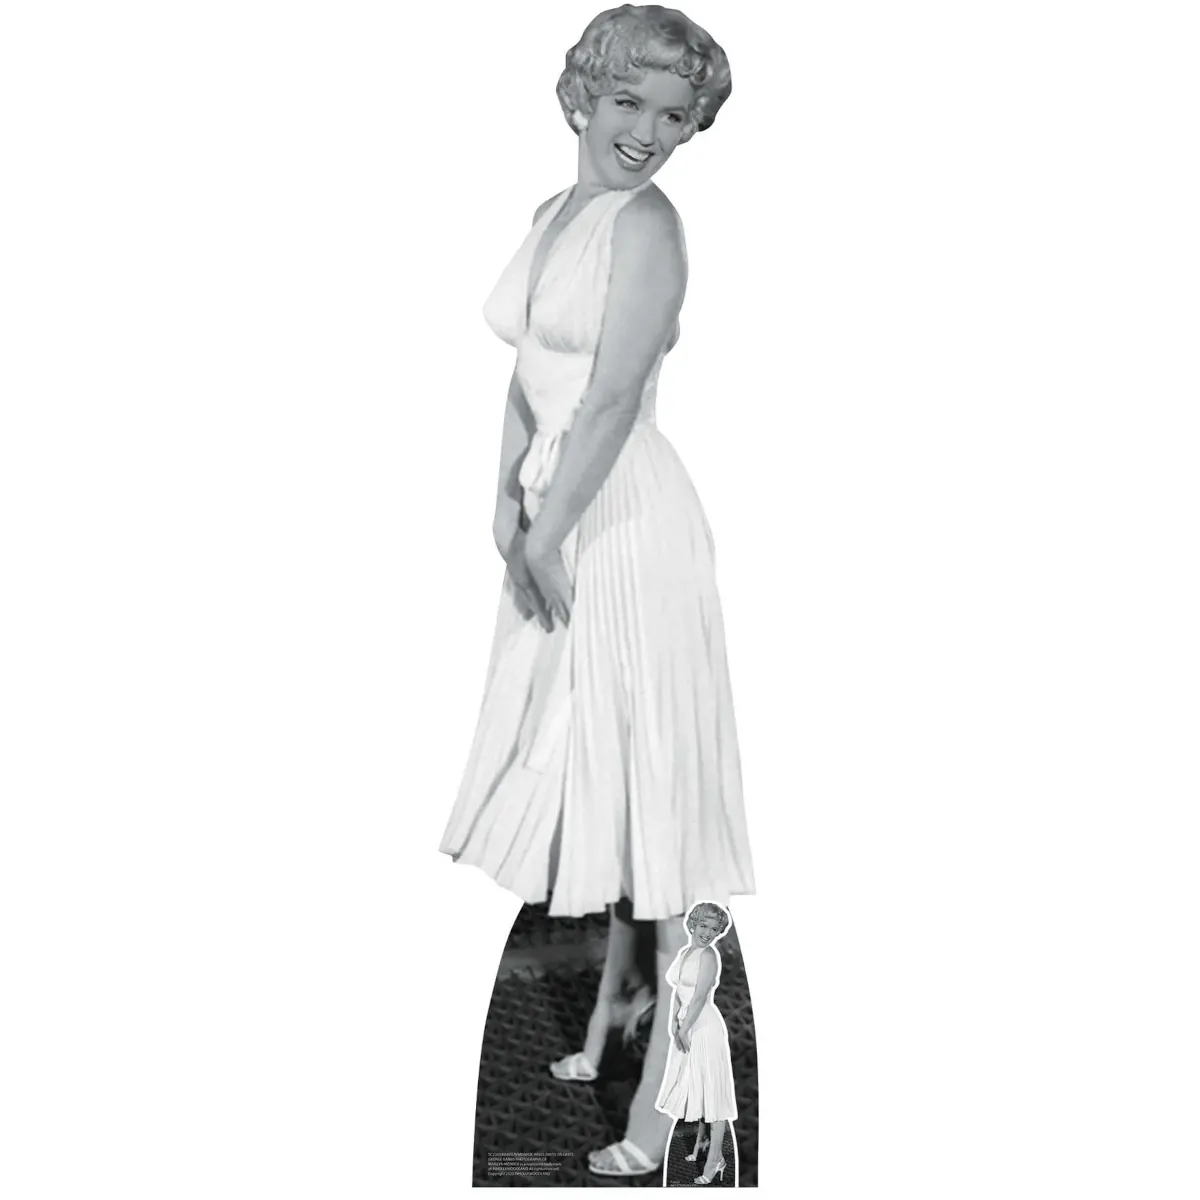 SC2383 Marilyn Monroe 'White Cocktail Dress' (American Actress) Lifesize + Mini Cardboard Cutout Standee Front